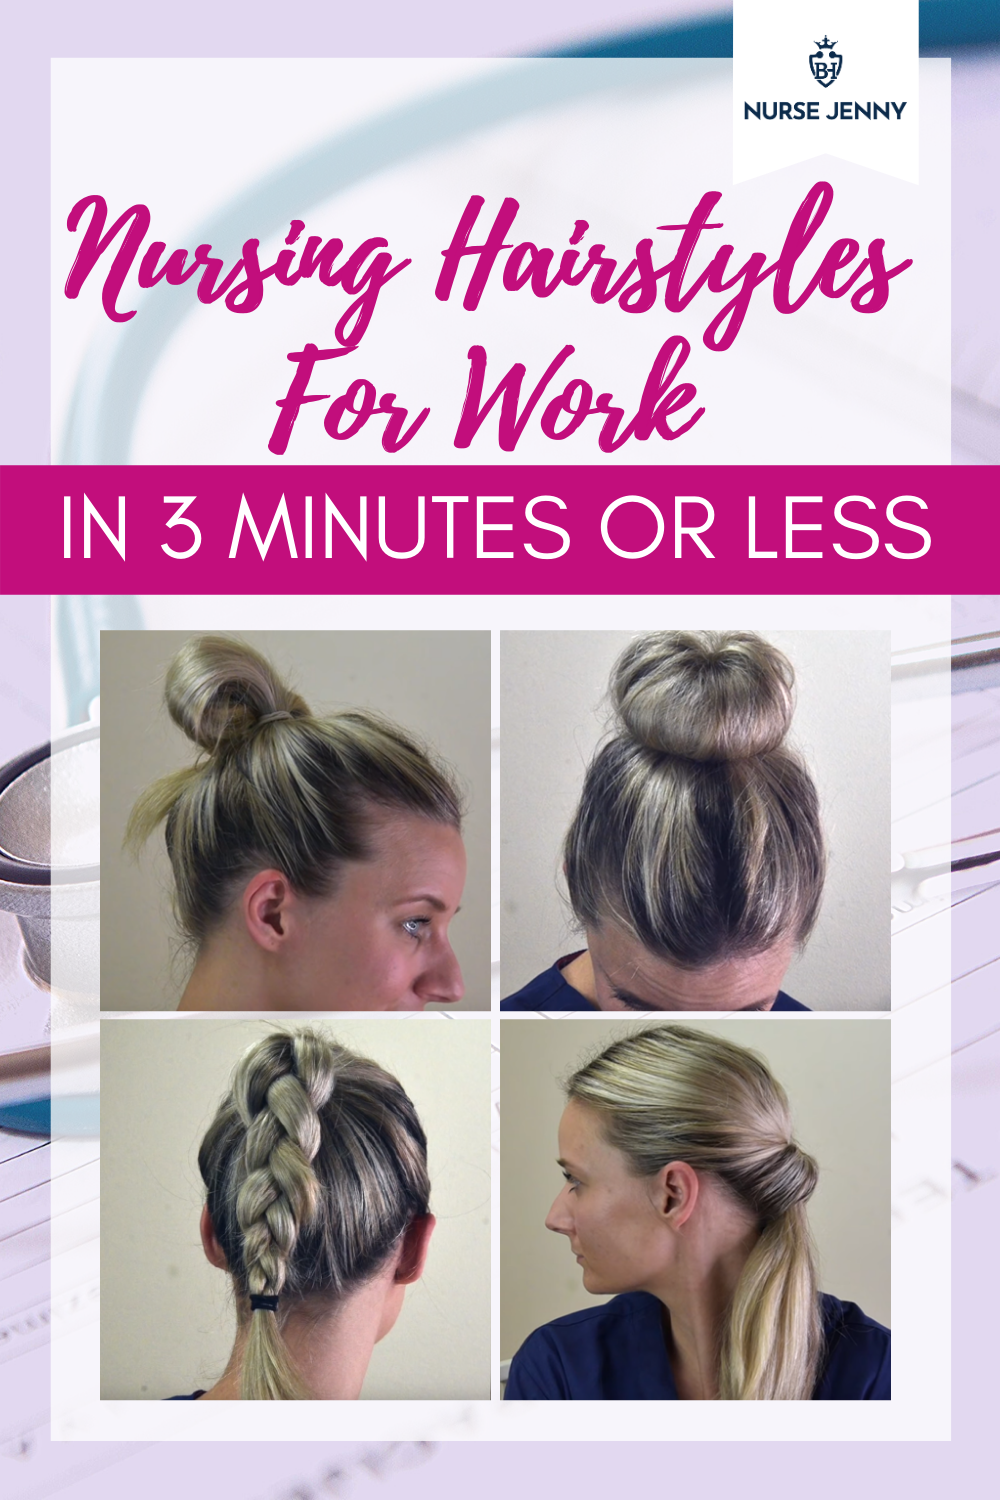 Image of French braid hairstyle for nurses